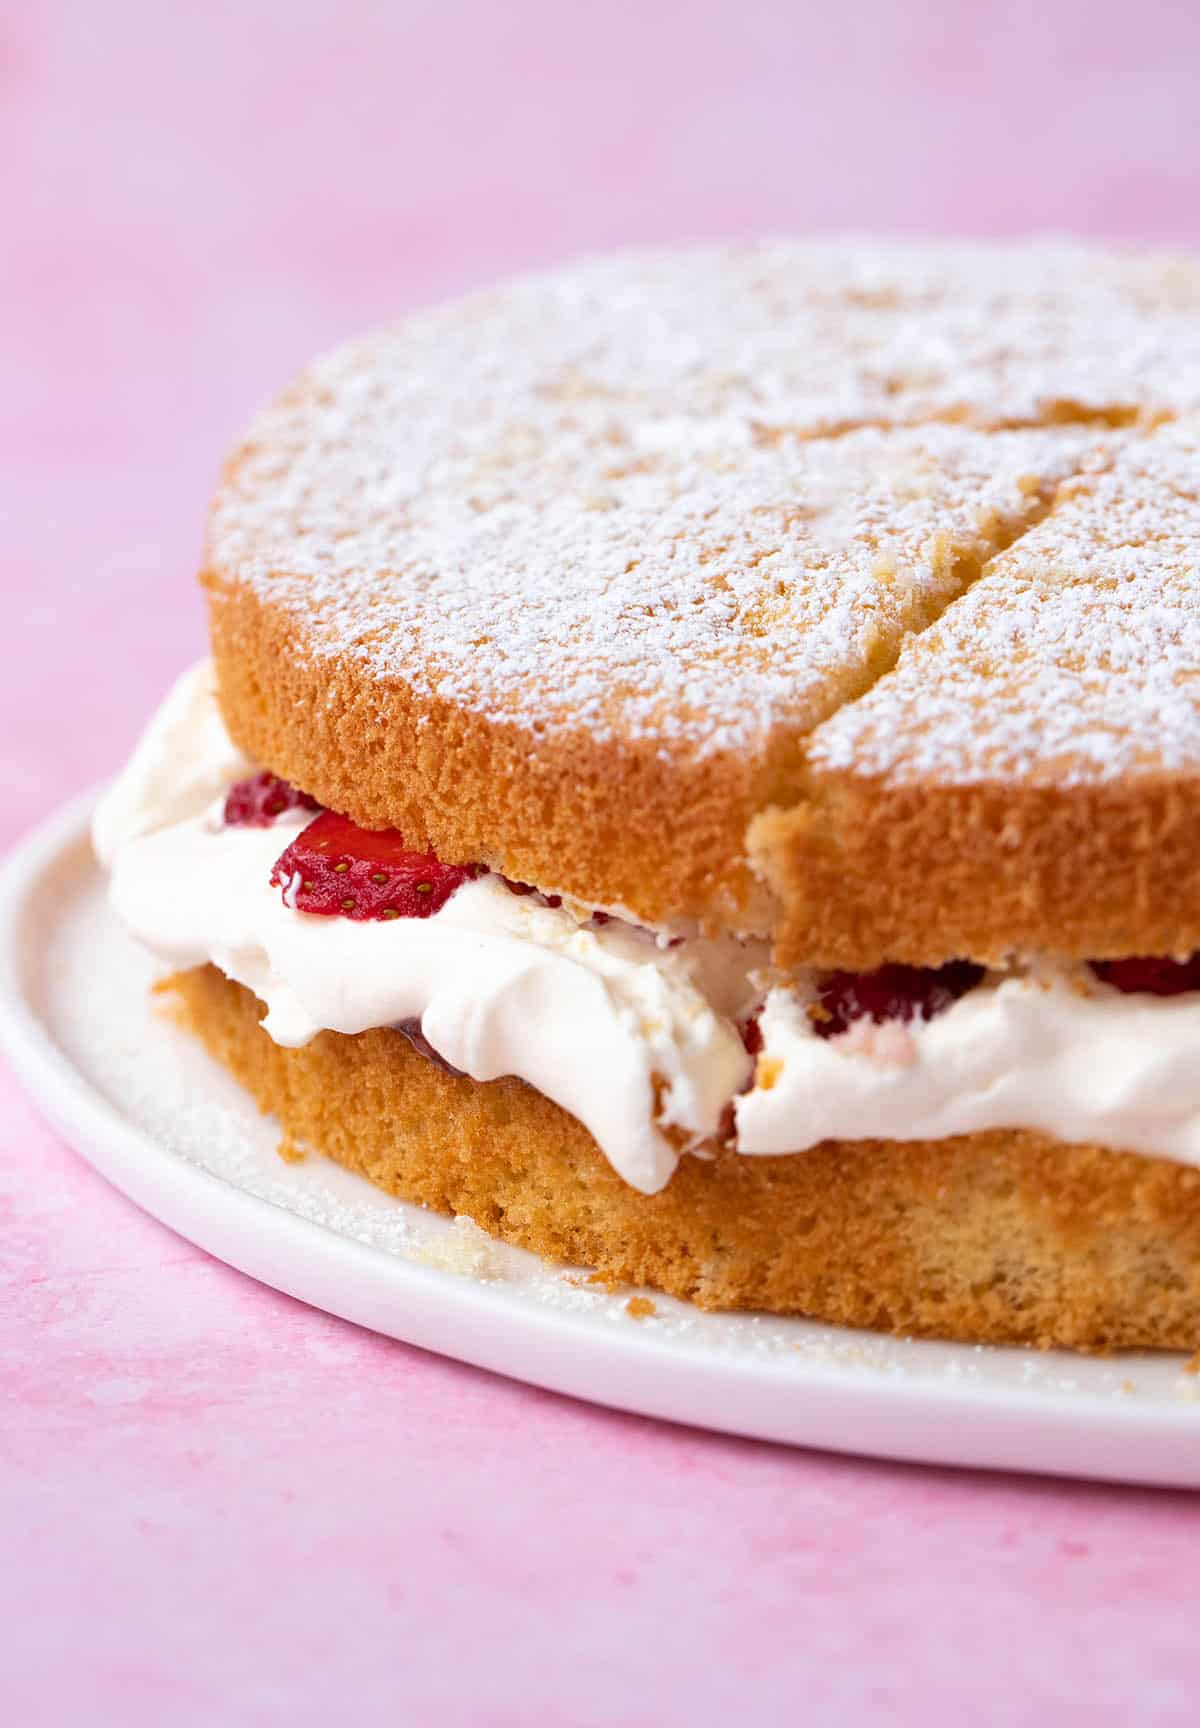 A layered sponge cake filled with cream and dusted with icing sugar on a pink background.